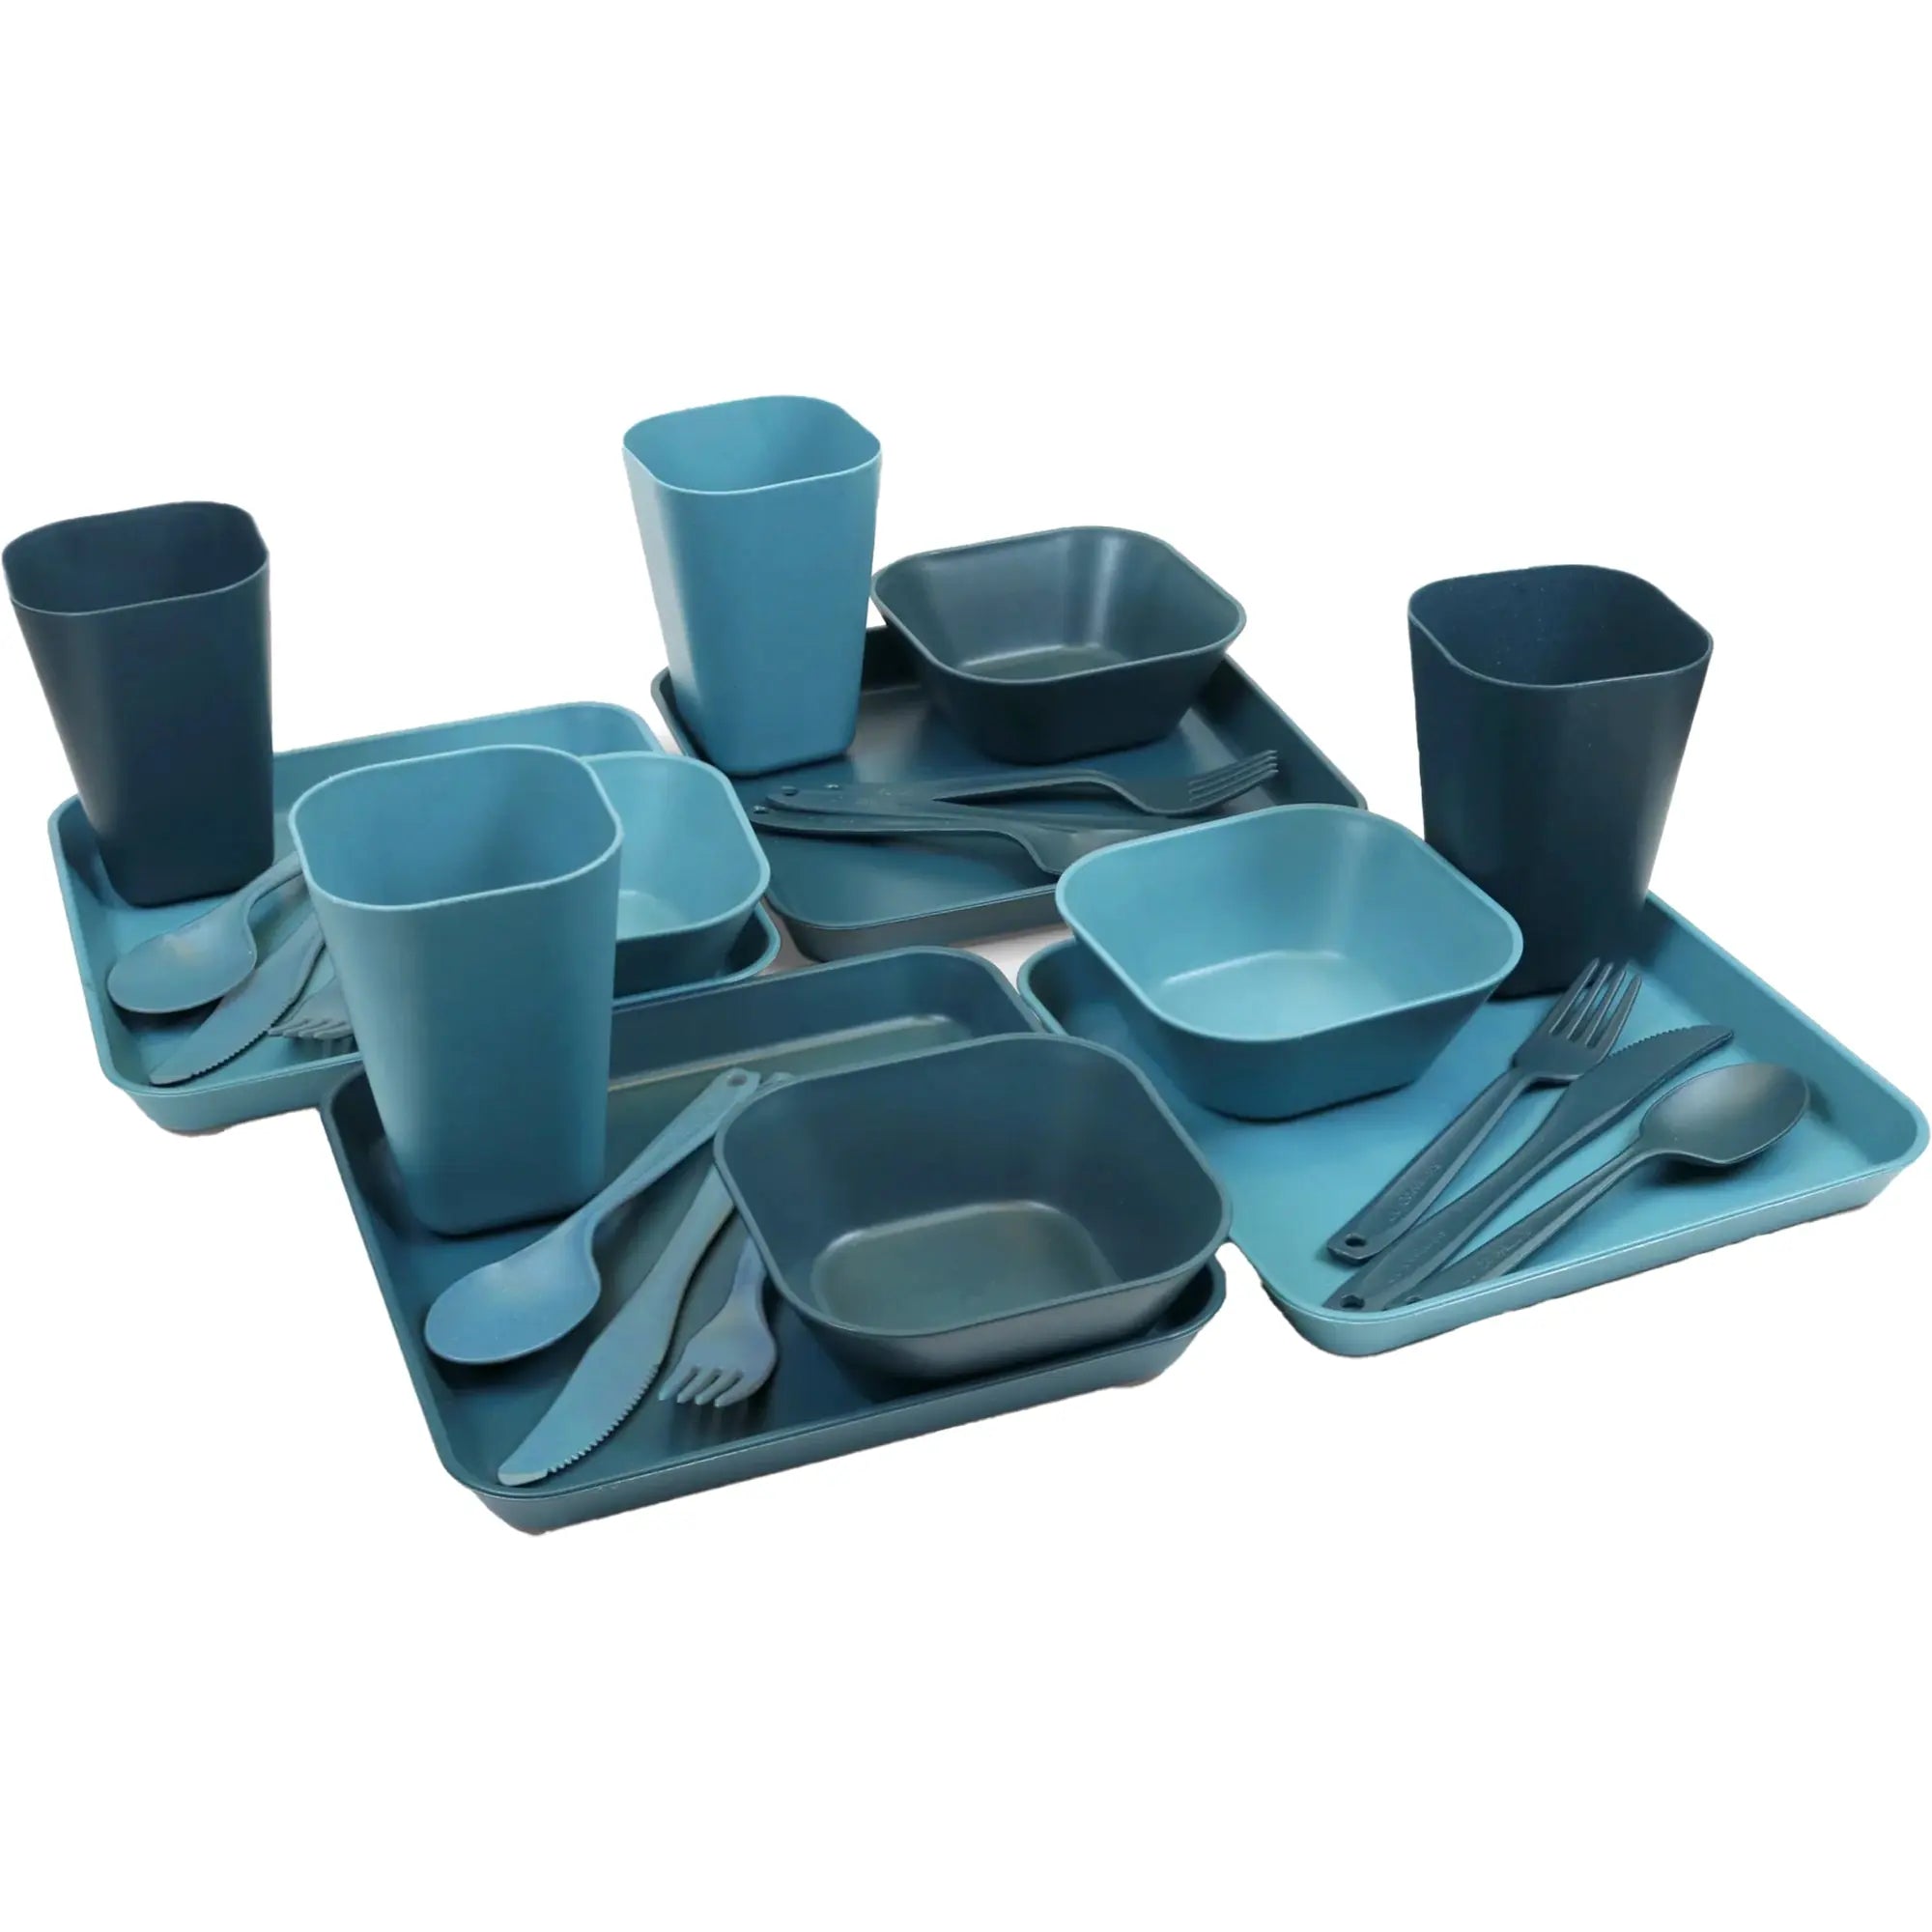 Coghlan's 4-Person Tableware Set for Outdoor Camping Coghlan's